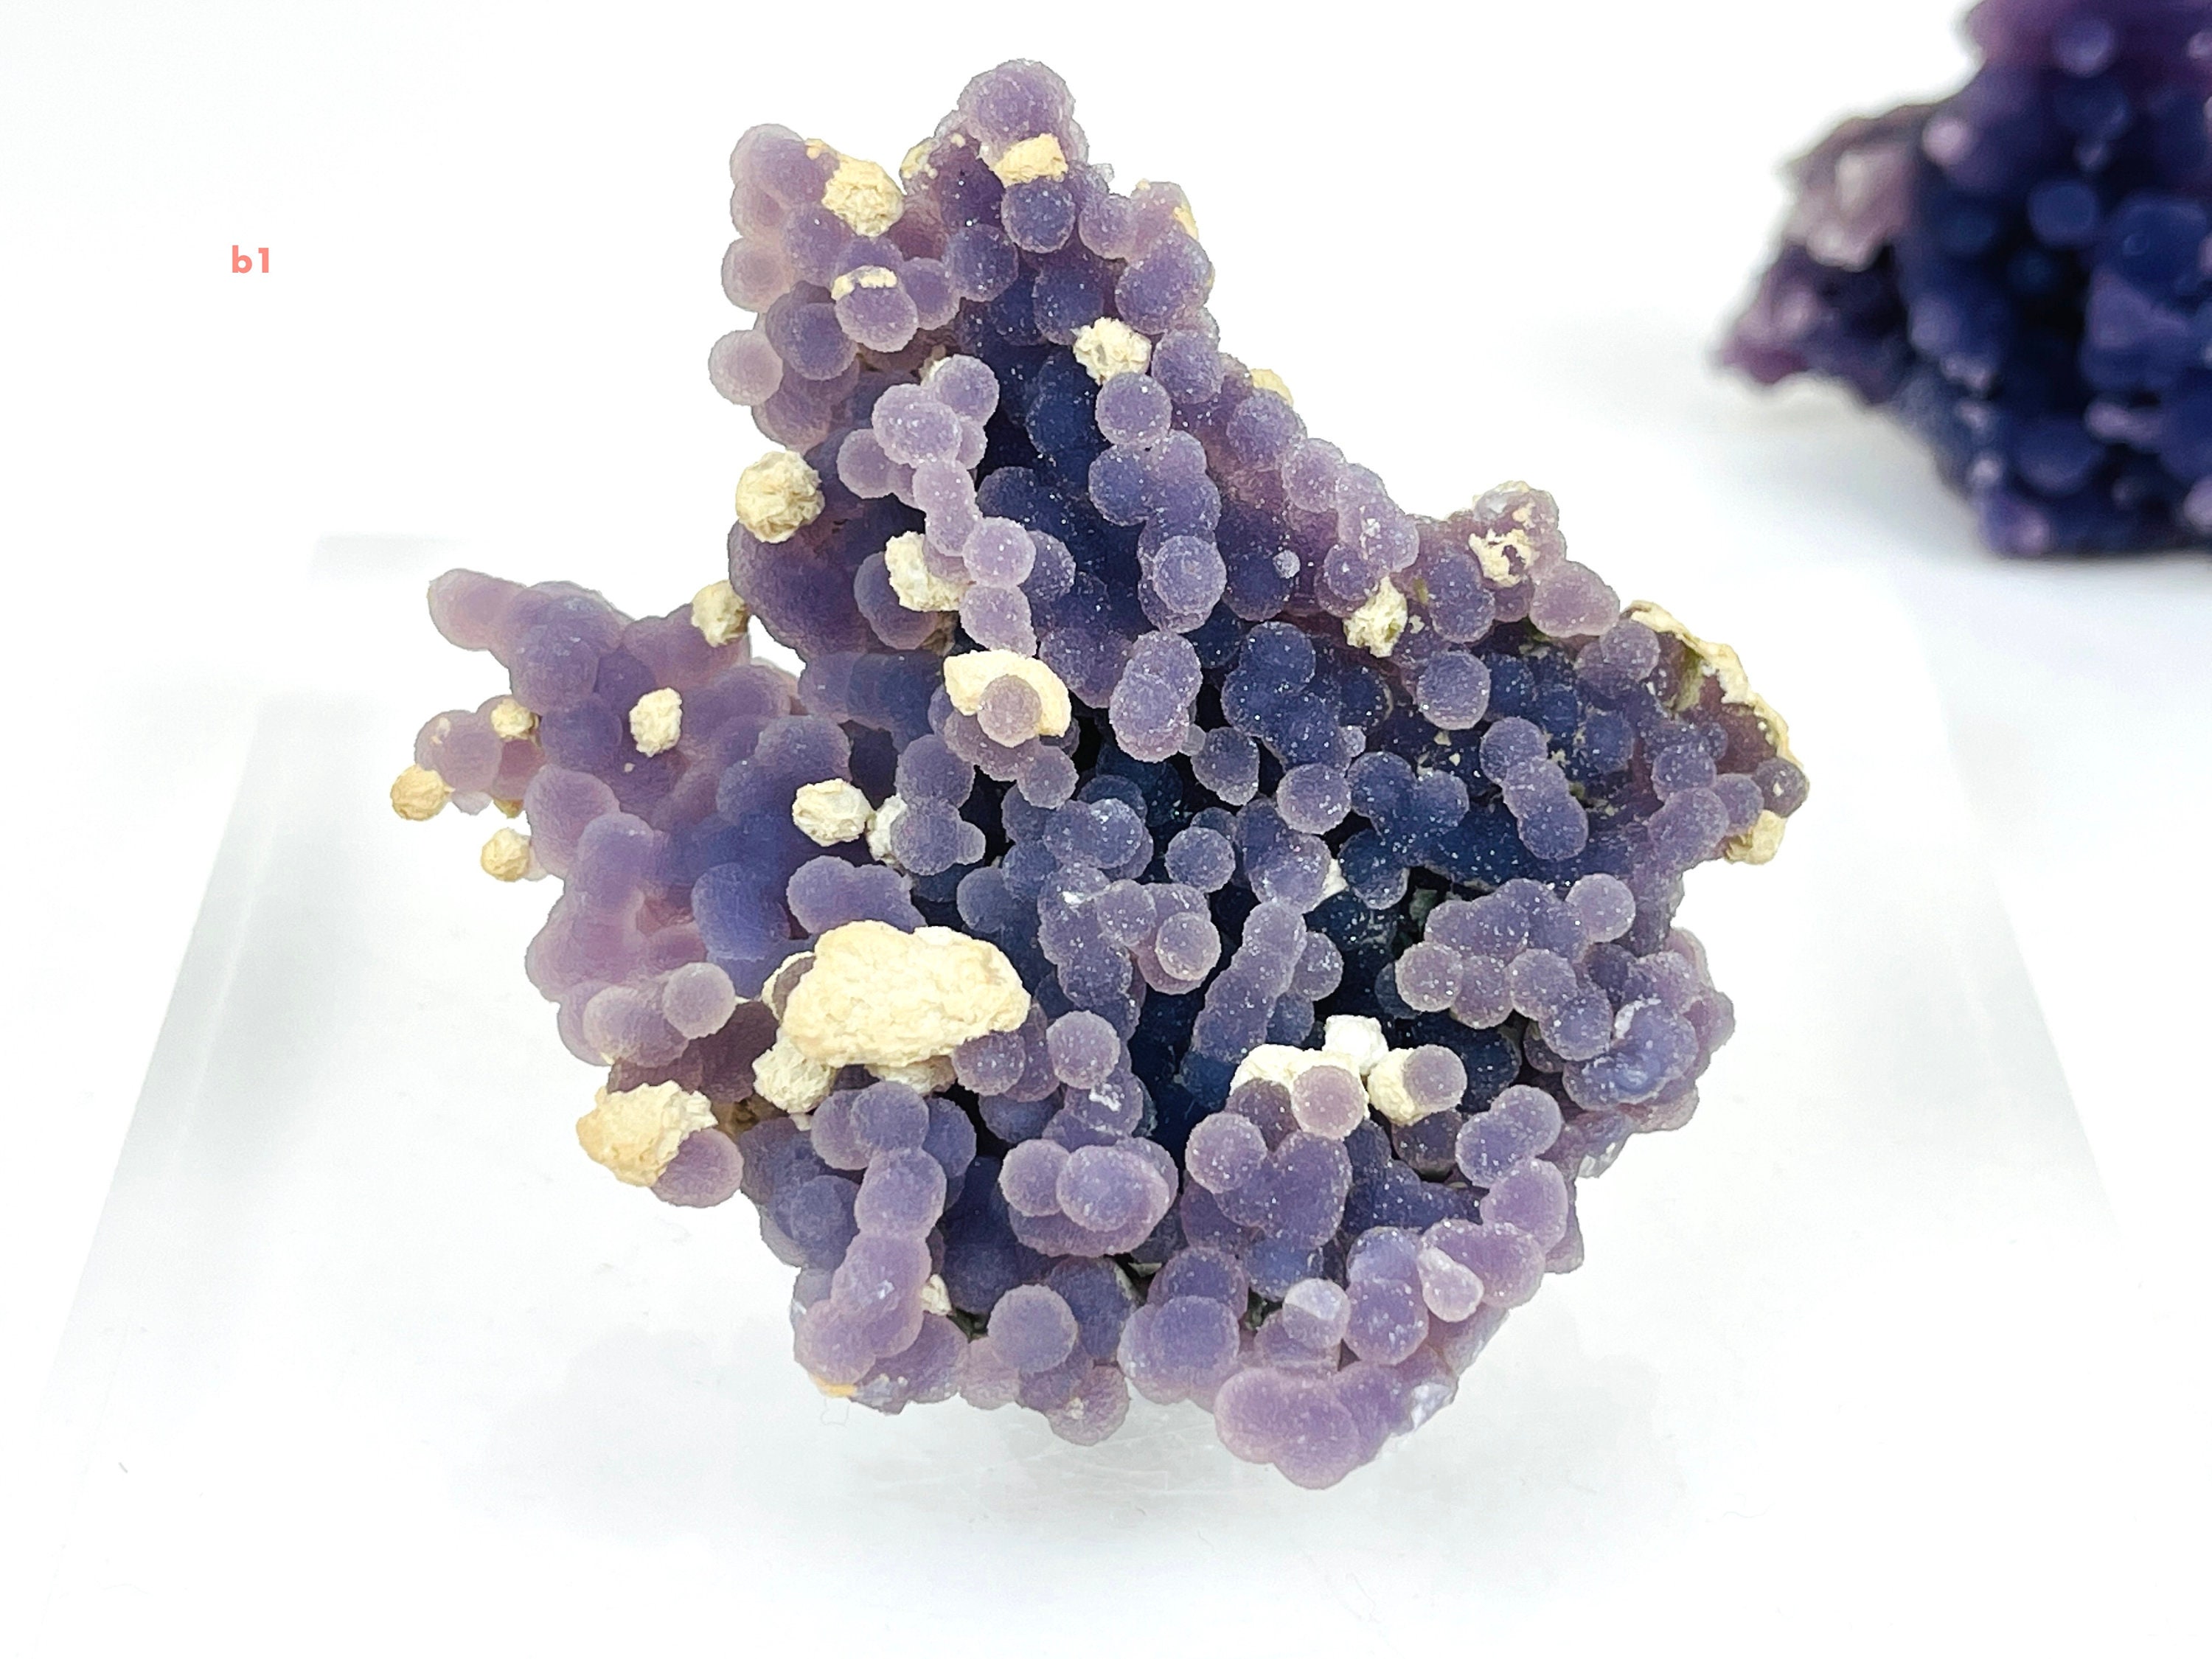 mineral specimen 329-2 Botryoidal Amethyst Natural Grape agate Specimen natural crystal,healing crystals Large chalcedony reiki healing